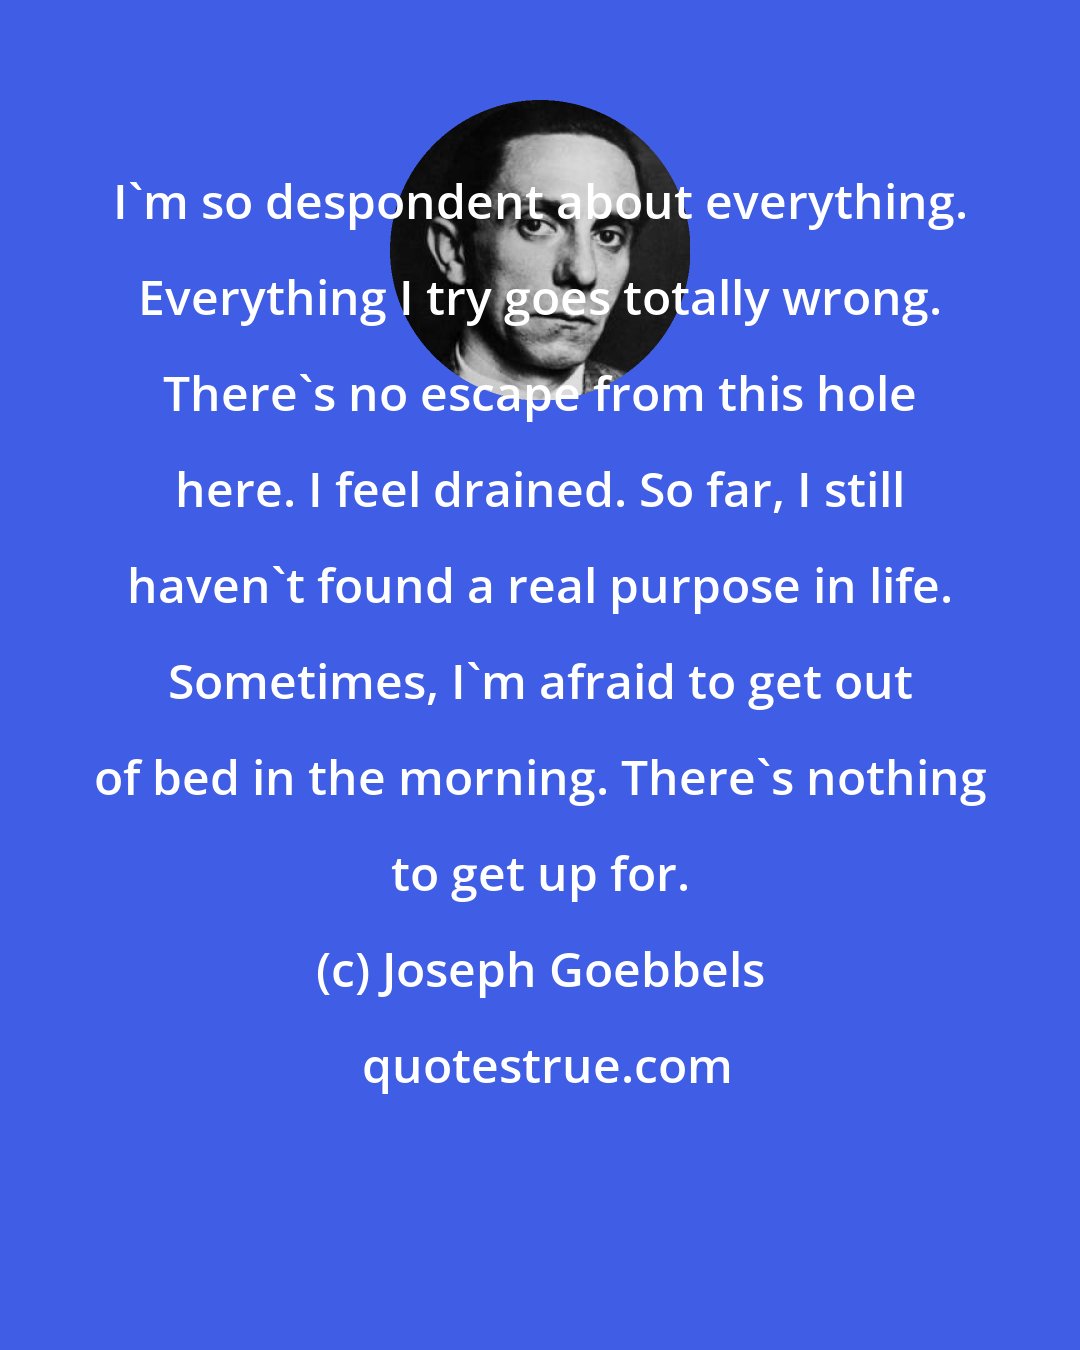 Joseph Goebbels: I'm so despondent about everything. Everything I try goes totally wrong. There's no escape from this hole here. I feel drained. So far, I still haven't found a real purpose in life. Sometimes, I'm afraid to get out of bed in the morning. There's nothing to get up for.